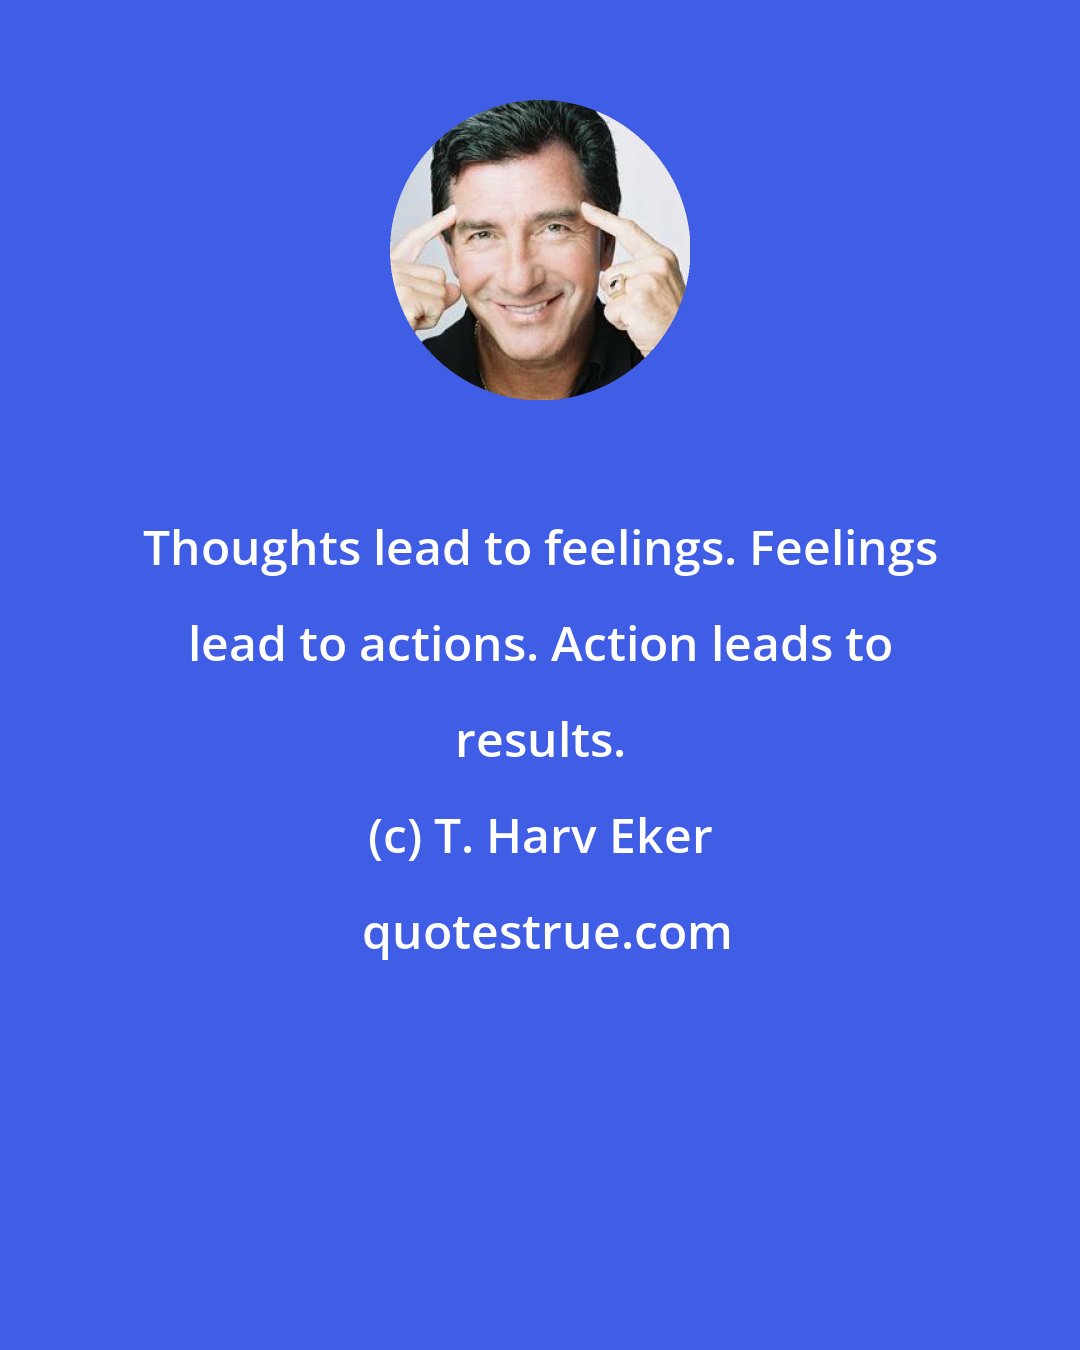 T. Harv Eker: Thoughts lead to feelings. Feelings lead to actions. Action leads to results.